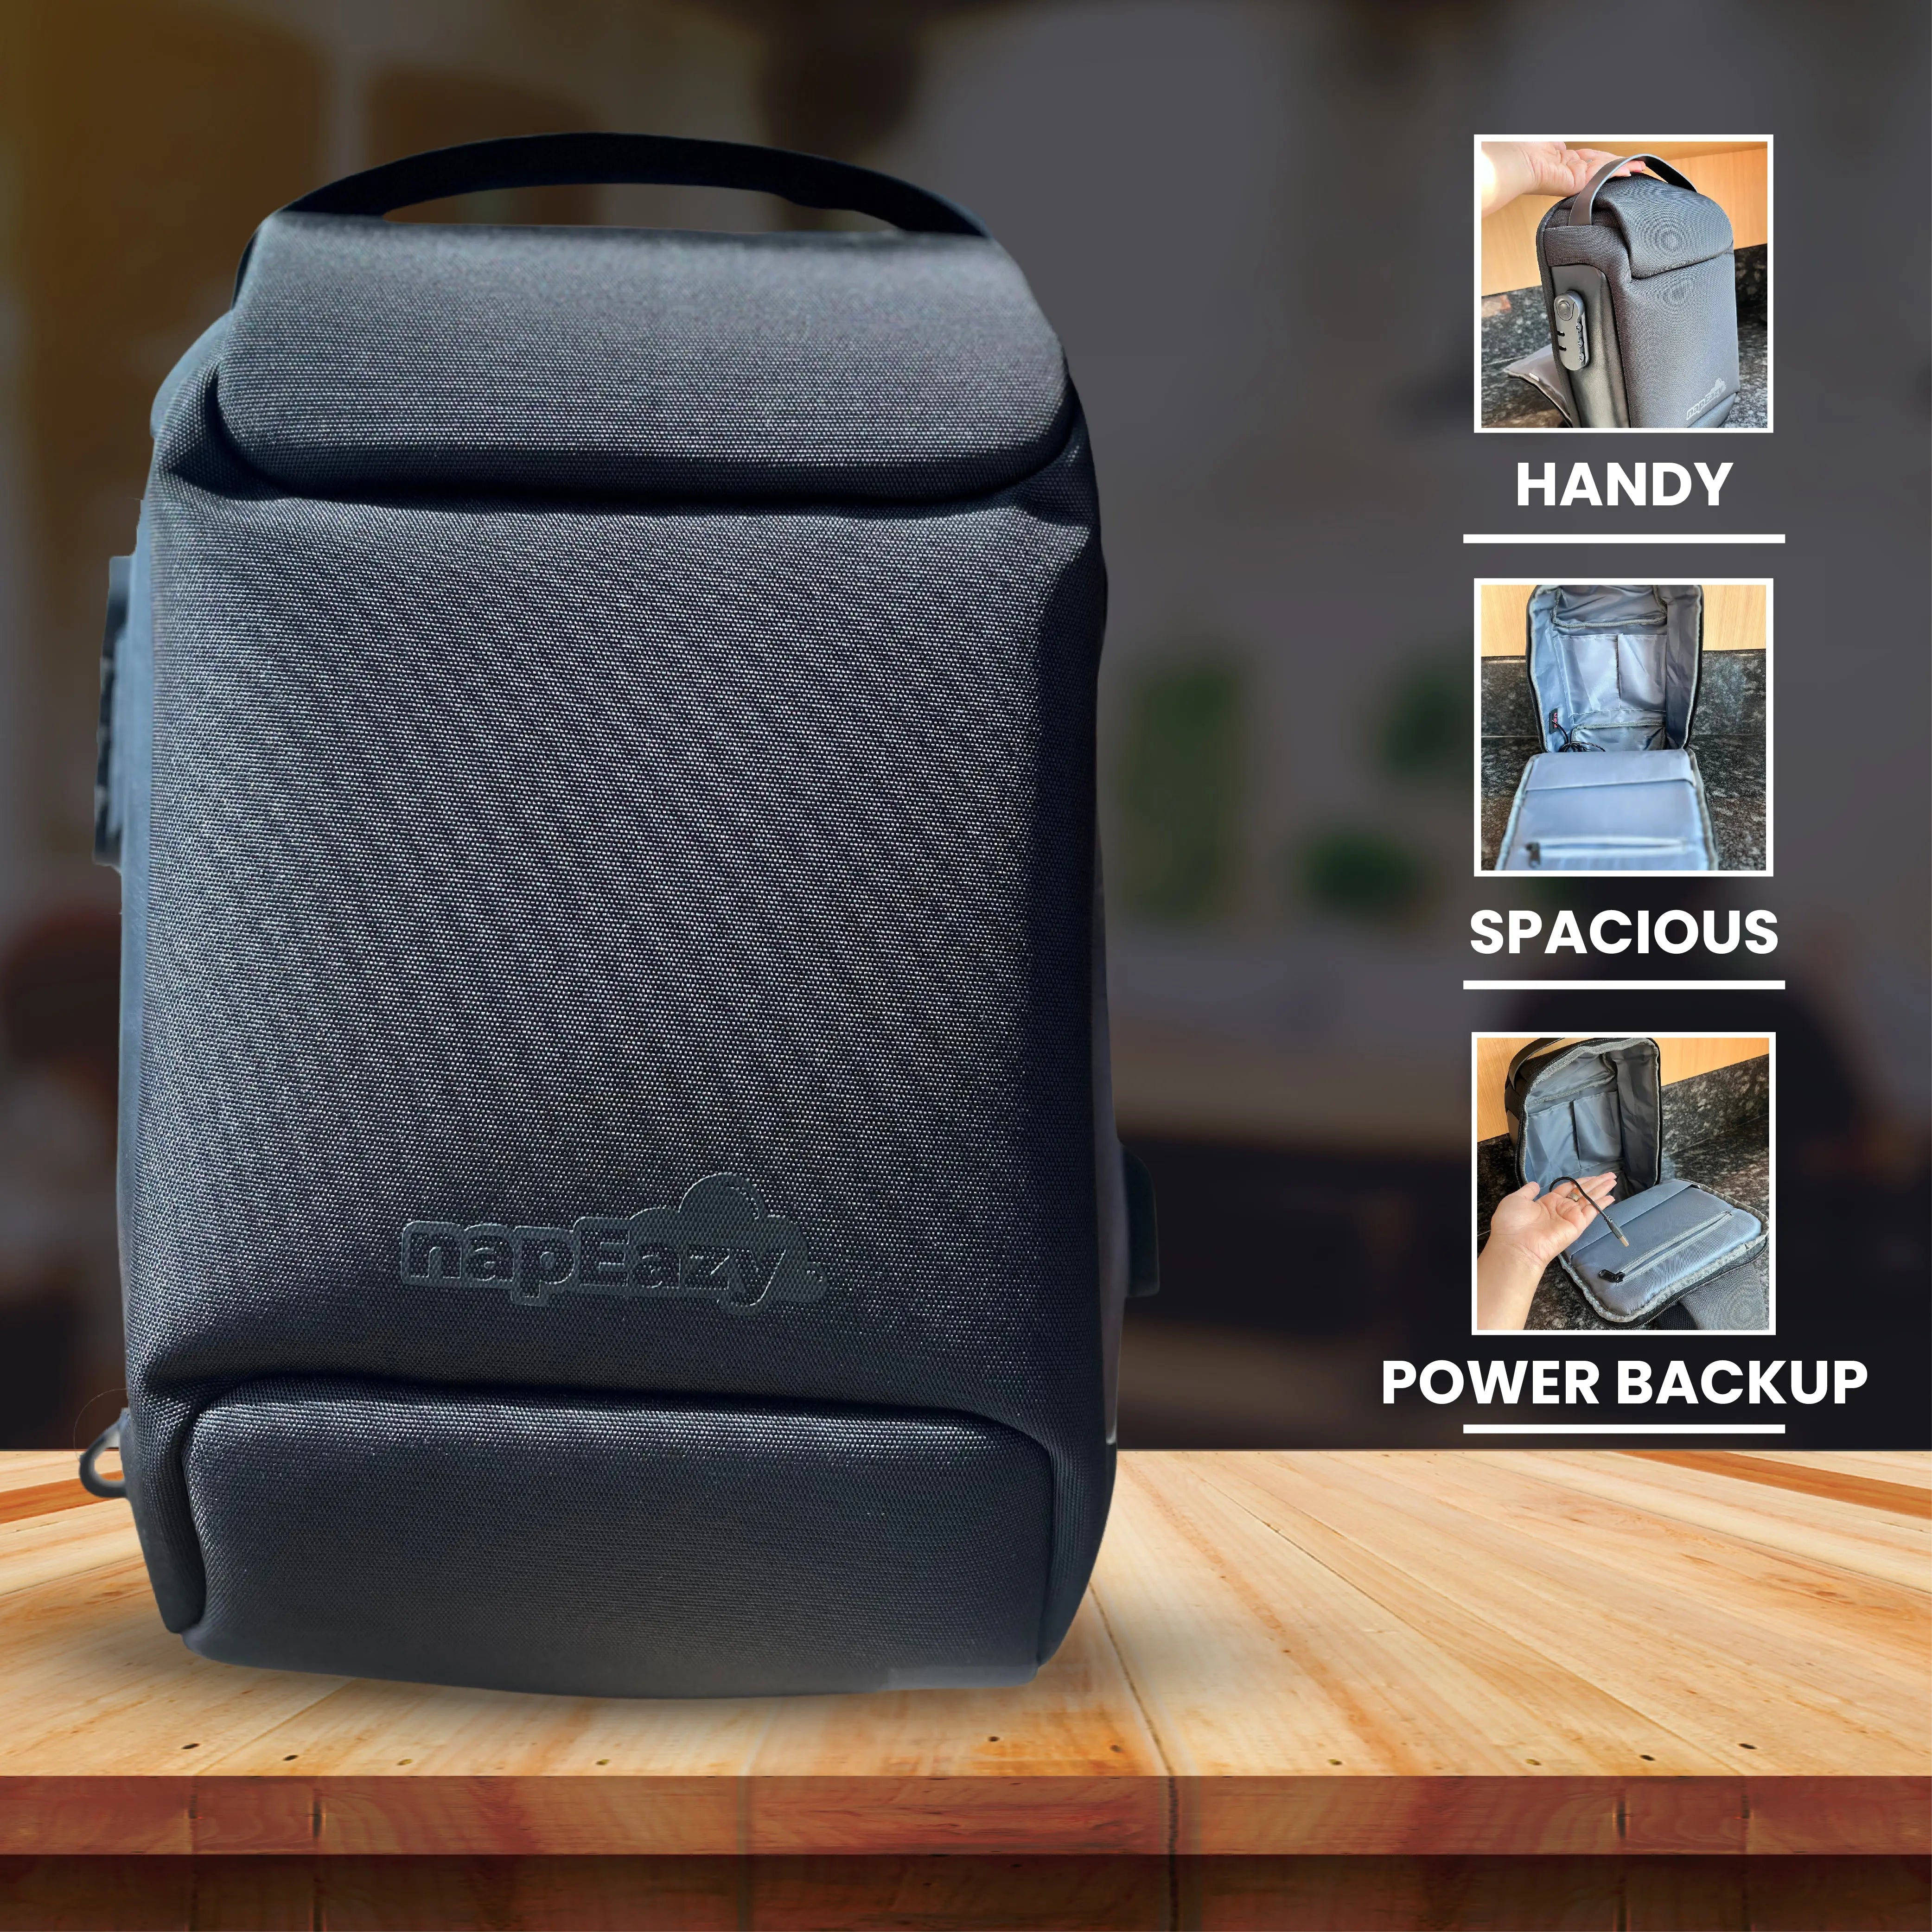 PACKEAZY - EVERYDAY SLING BAG FOR THE MODERN TRAVELER napEazy